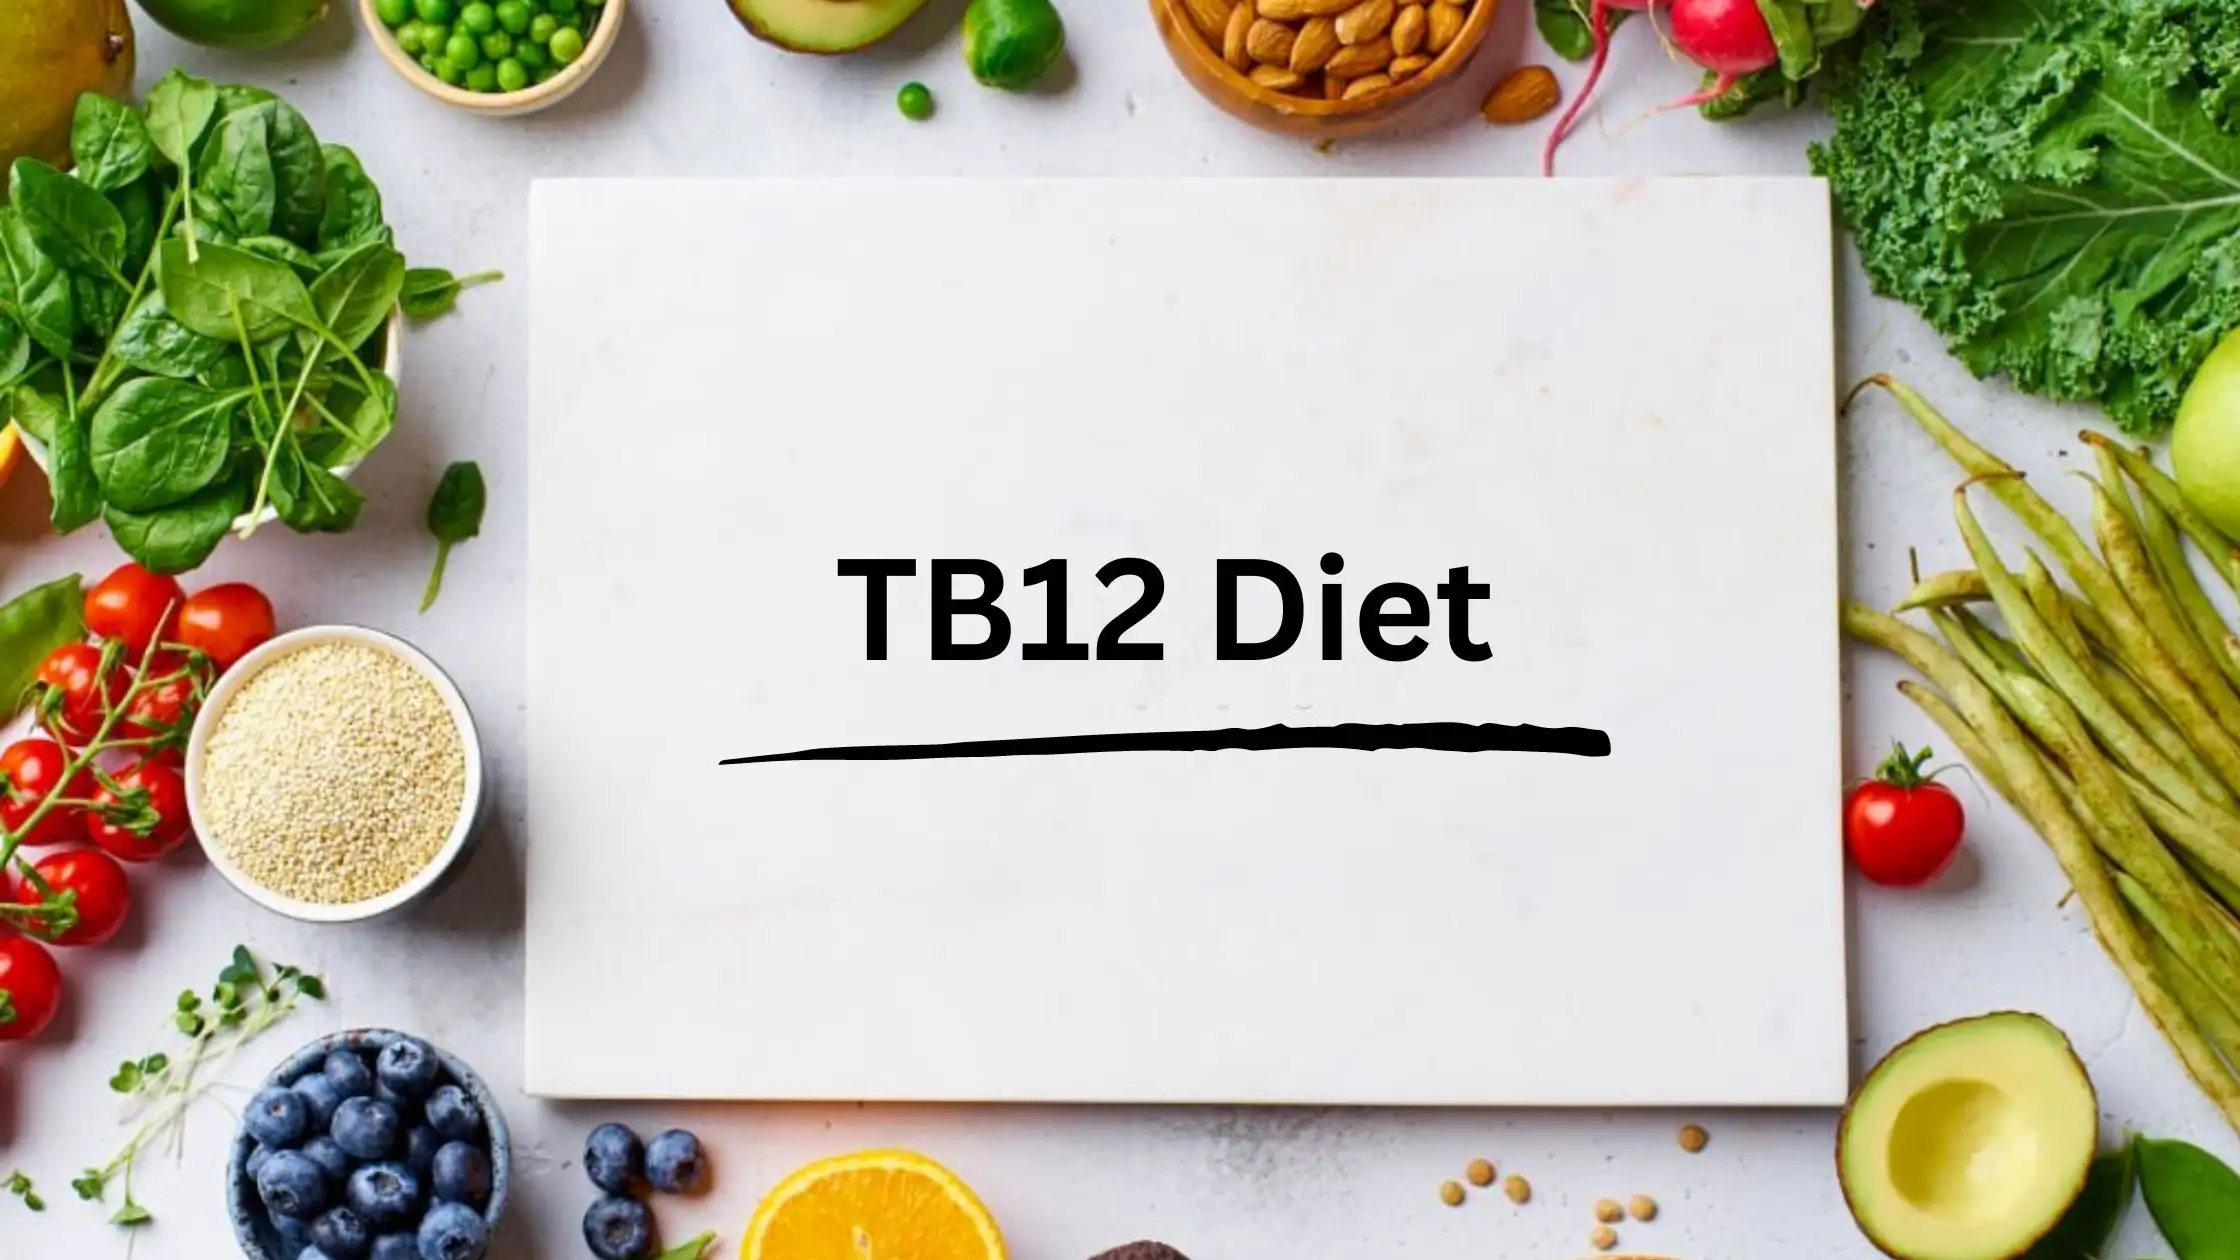 TB12 Diet And Weight Loss